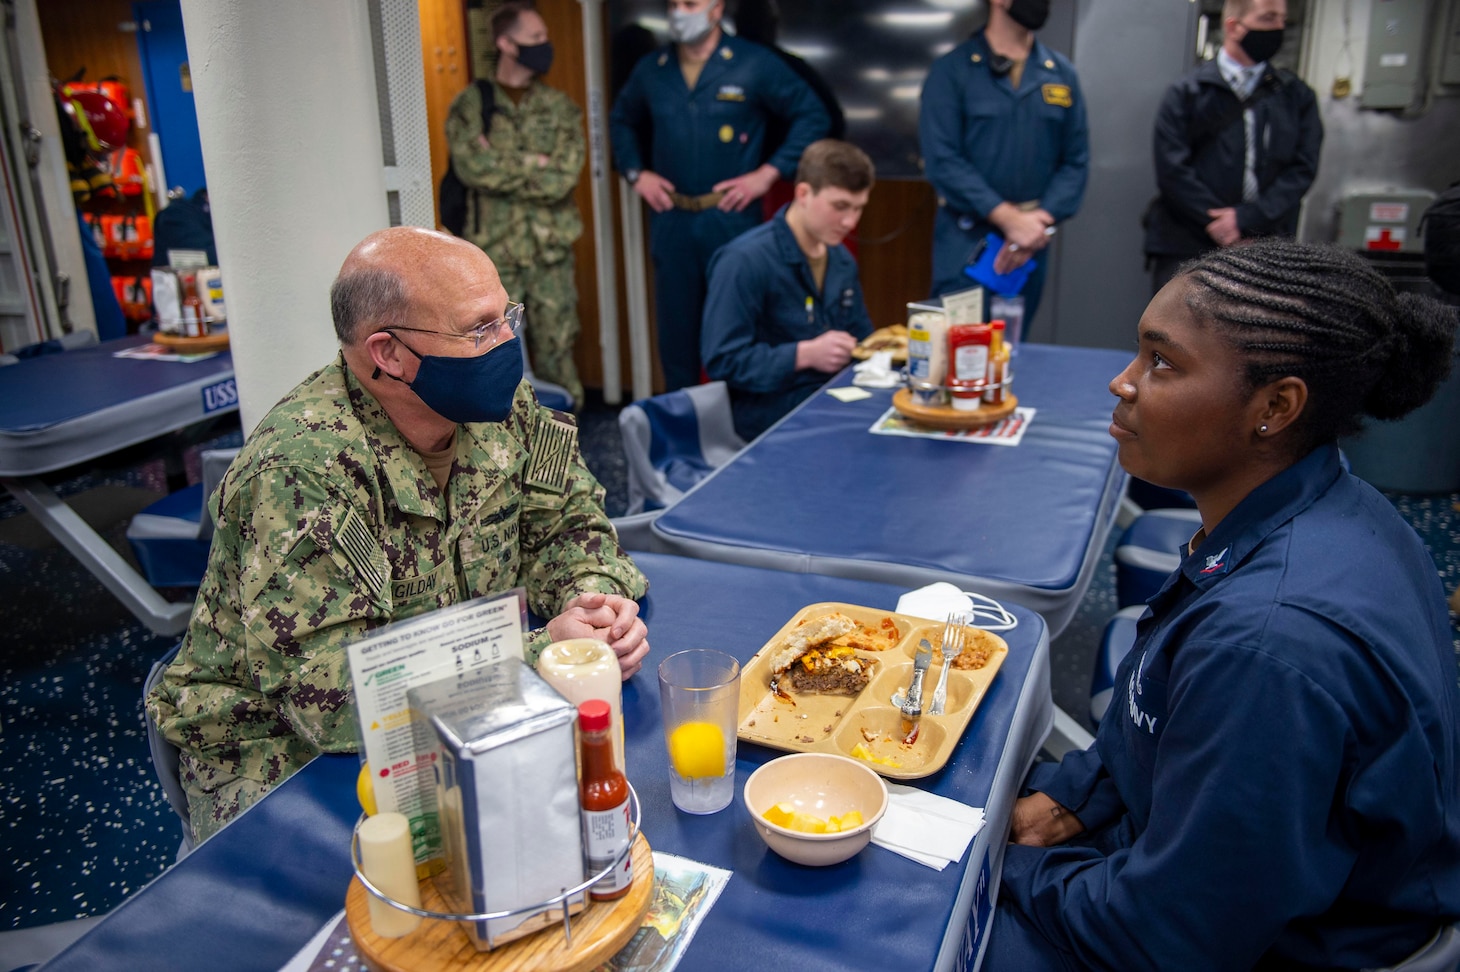 Chief of Naval Operations Adm. Mike Gilday, left, speaks with Boatswain's Mate 3rd Class Odera Weaks aboard the guided-missile destroyer USS John Paul Jones (DDG 53).